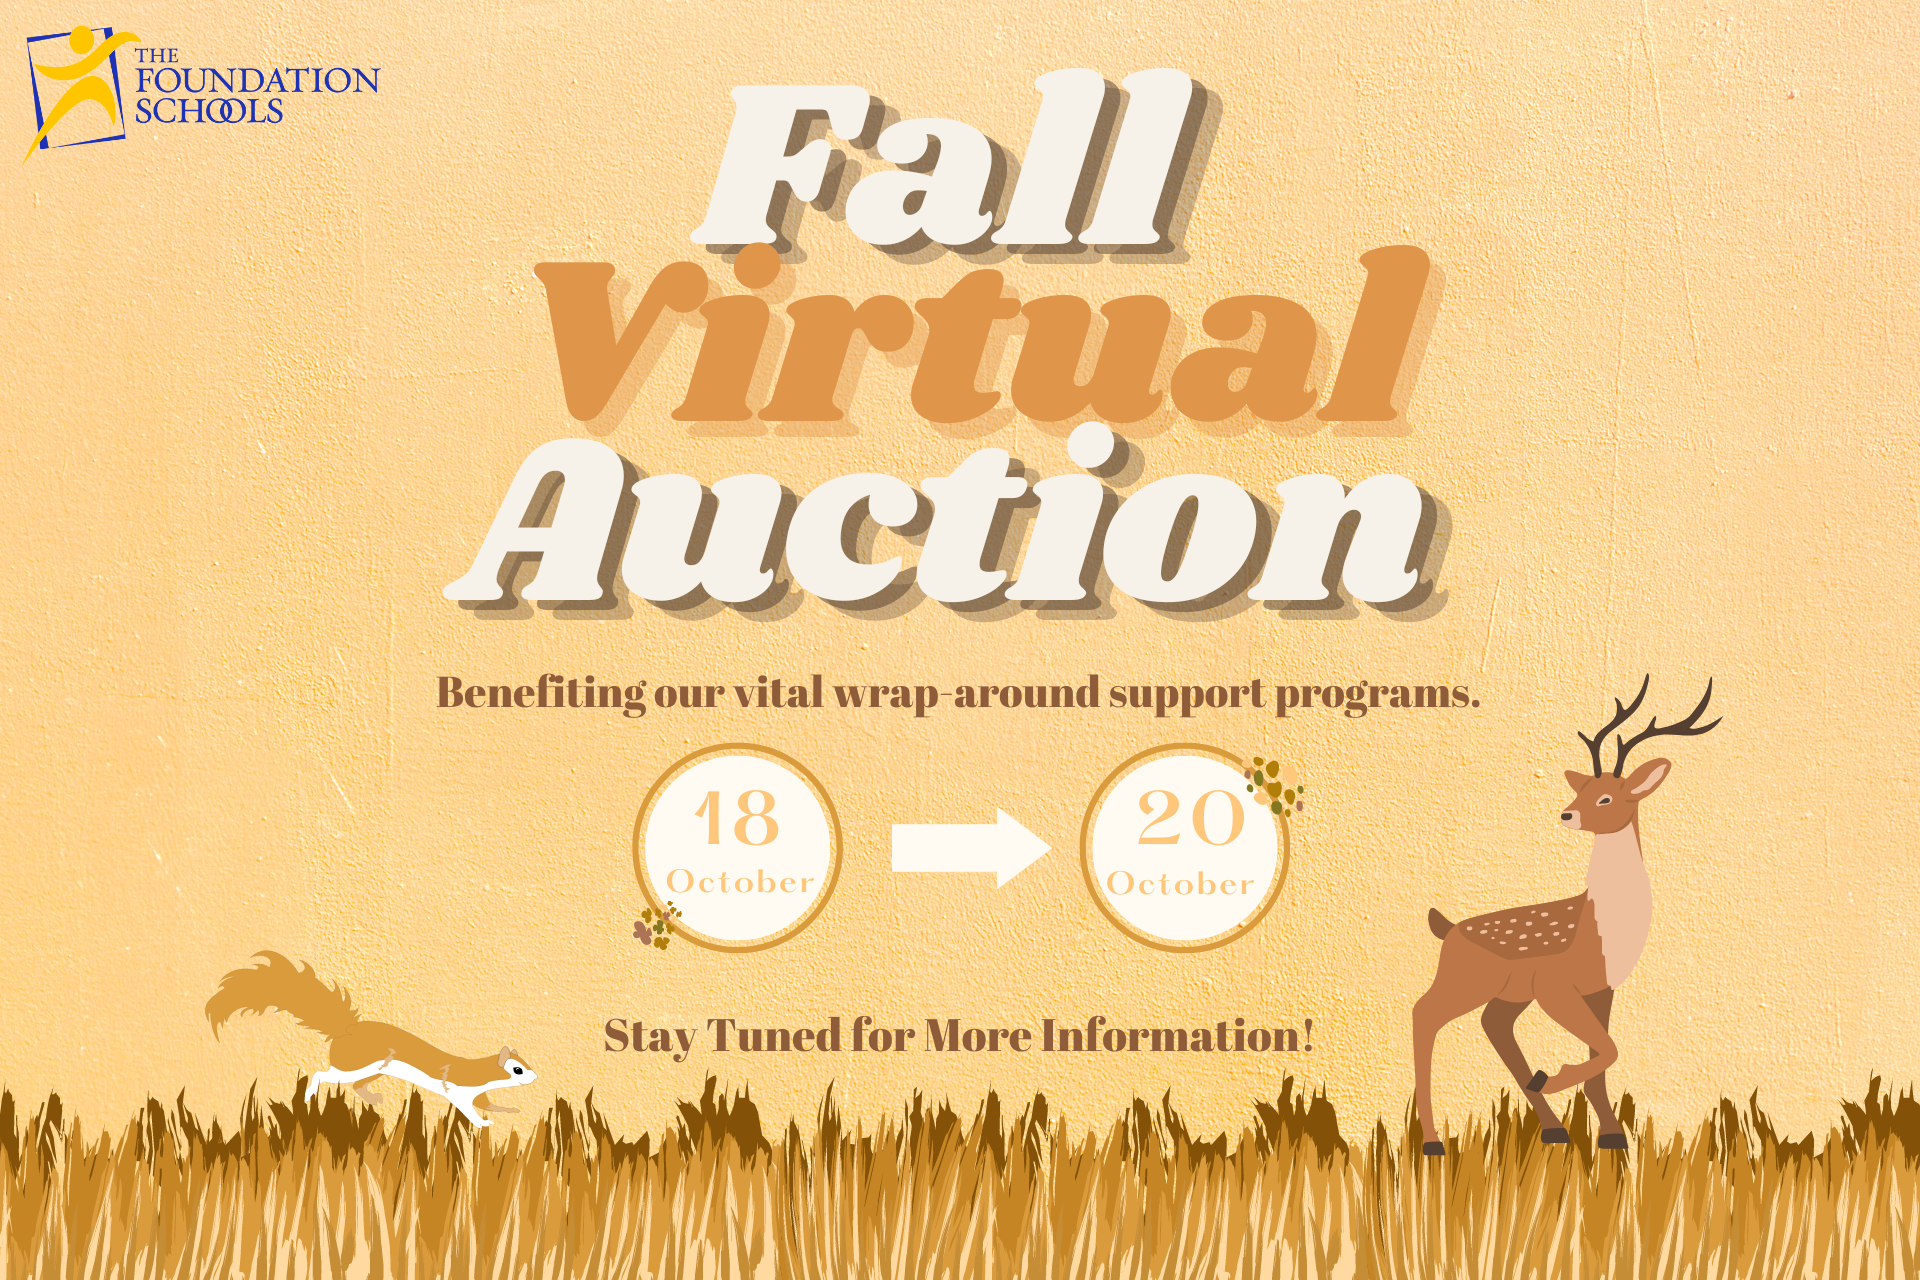 Fall Virtual Auction Flyer (1920 × 1280 px)